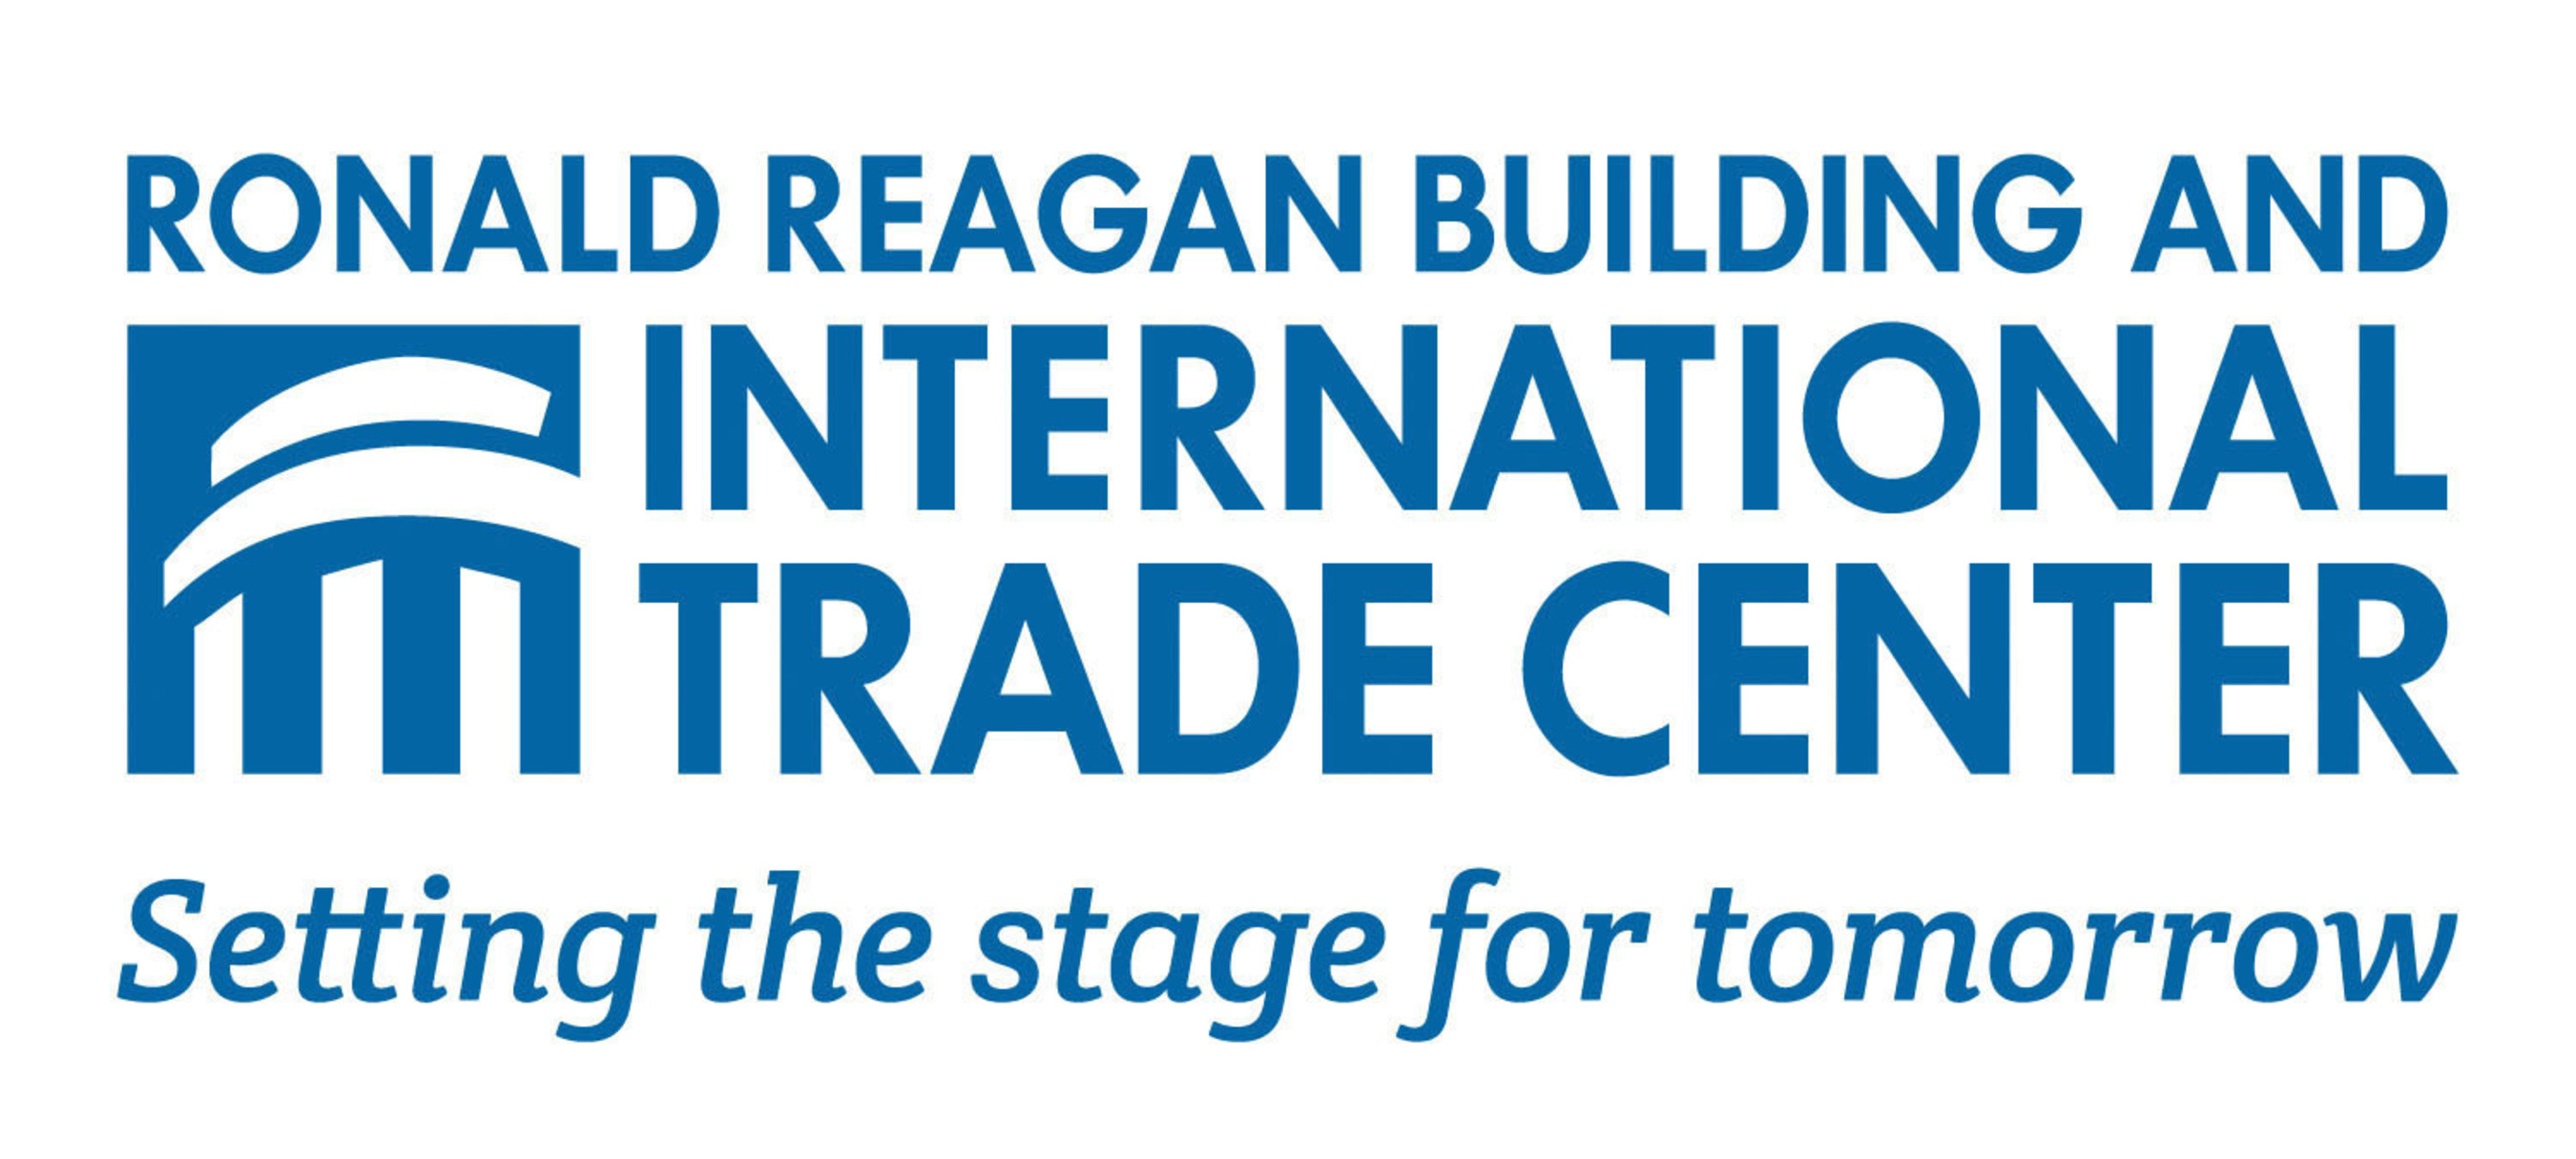 Setting the stage for tomorrow at the Ronald Reagan Building and International Trade Center